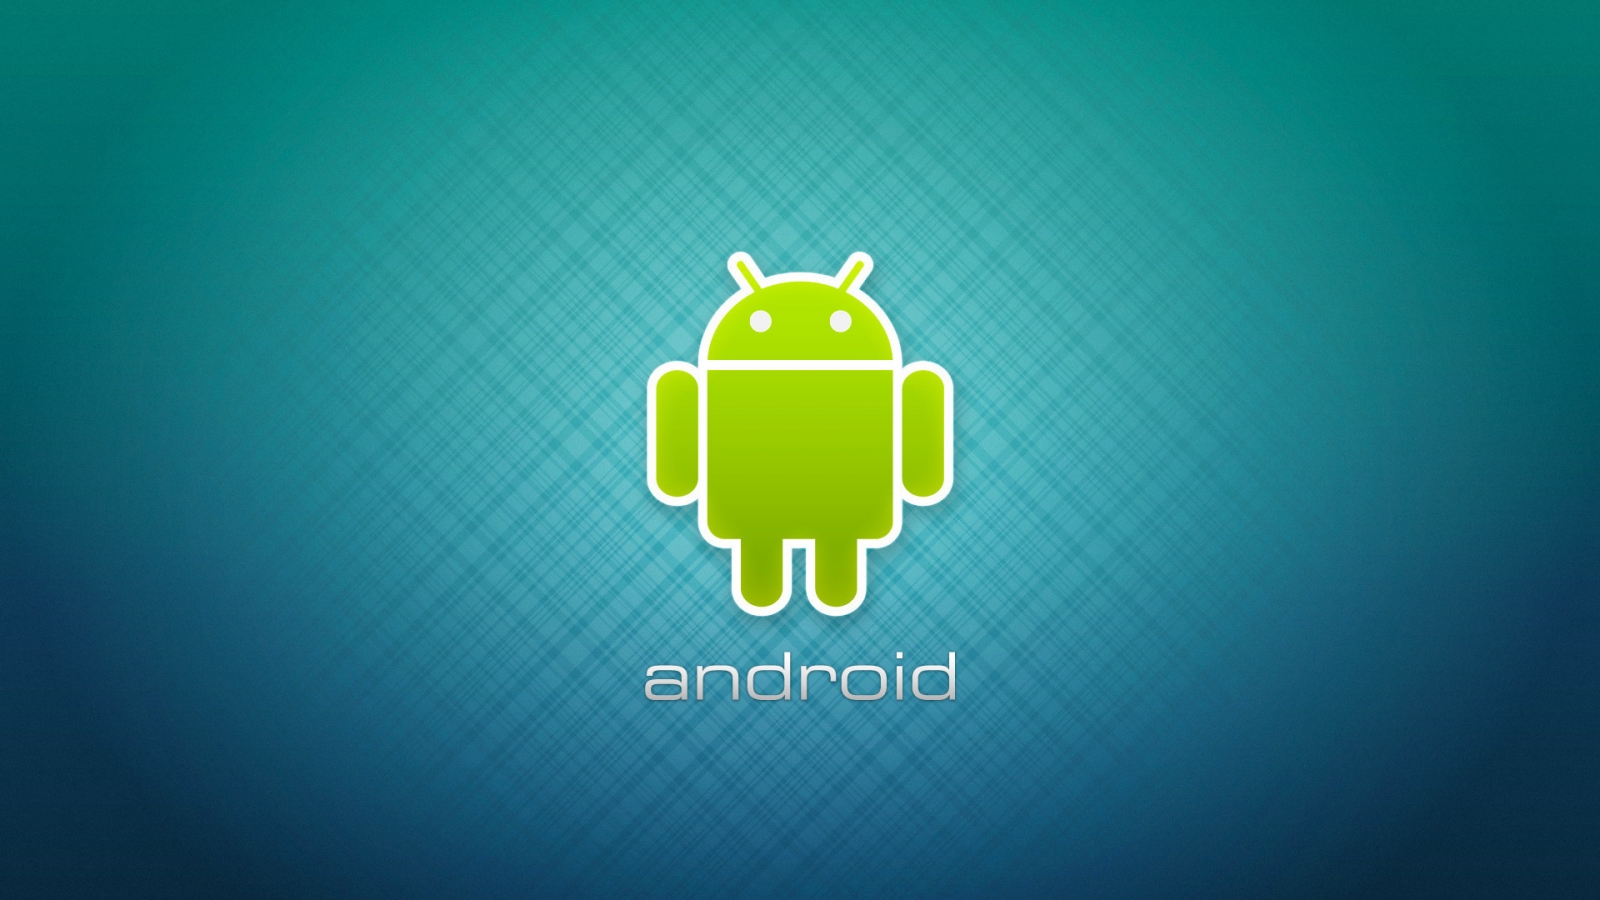 Just Android Logo for 1600 x 900 HDTV resolution